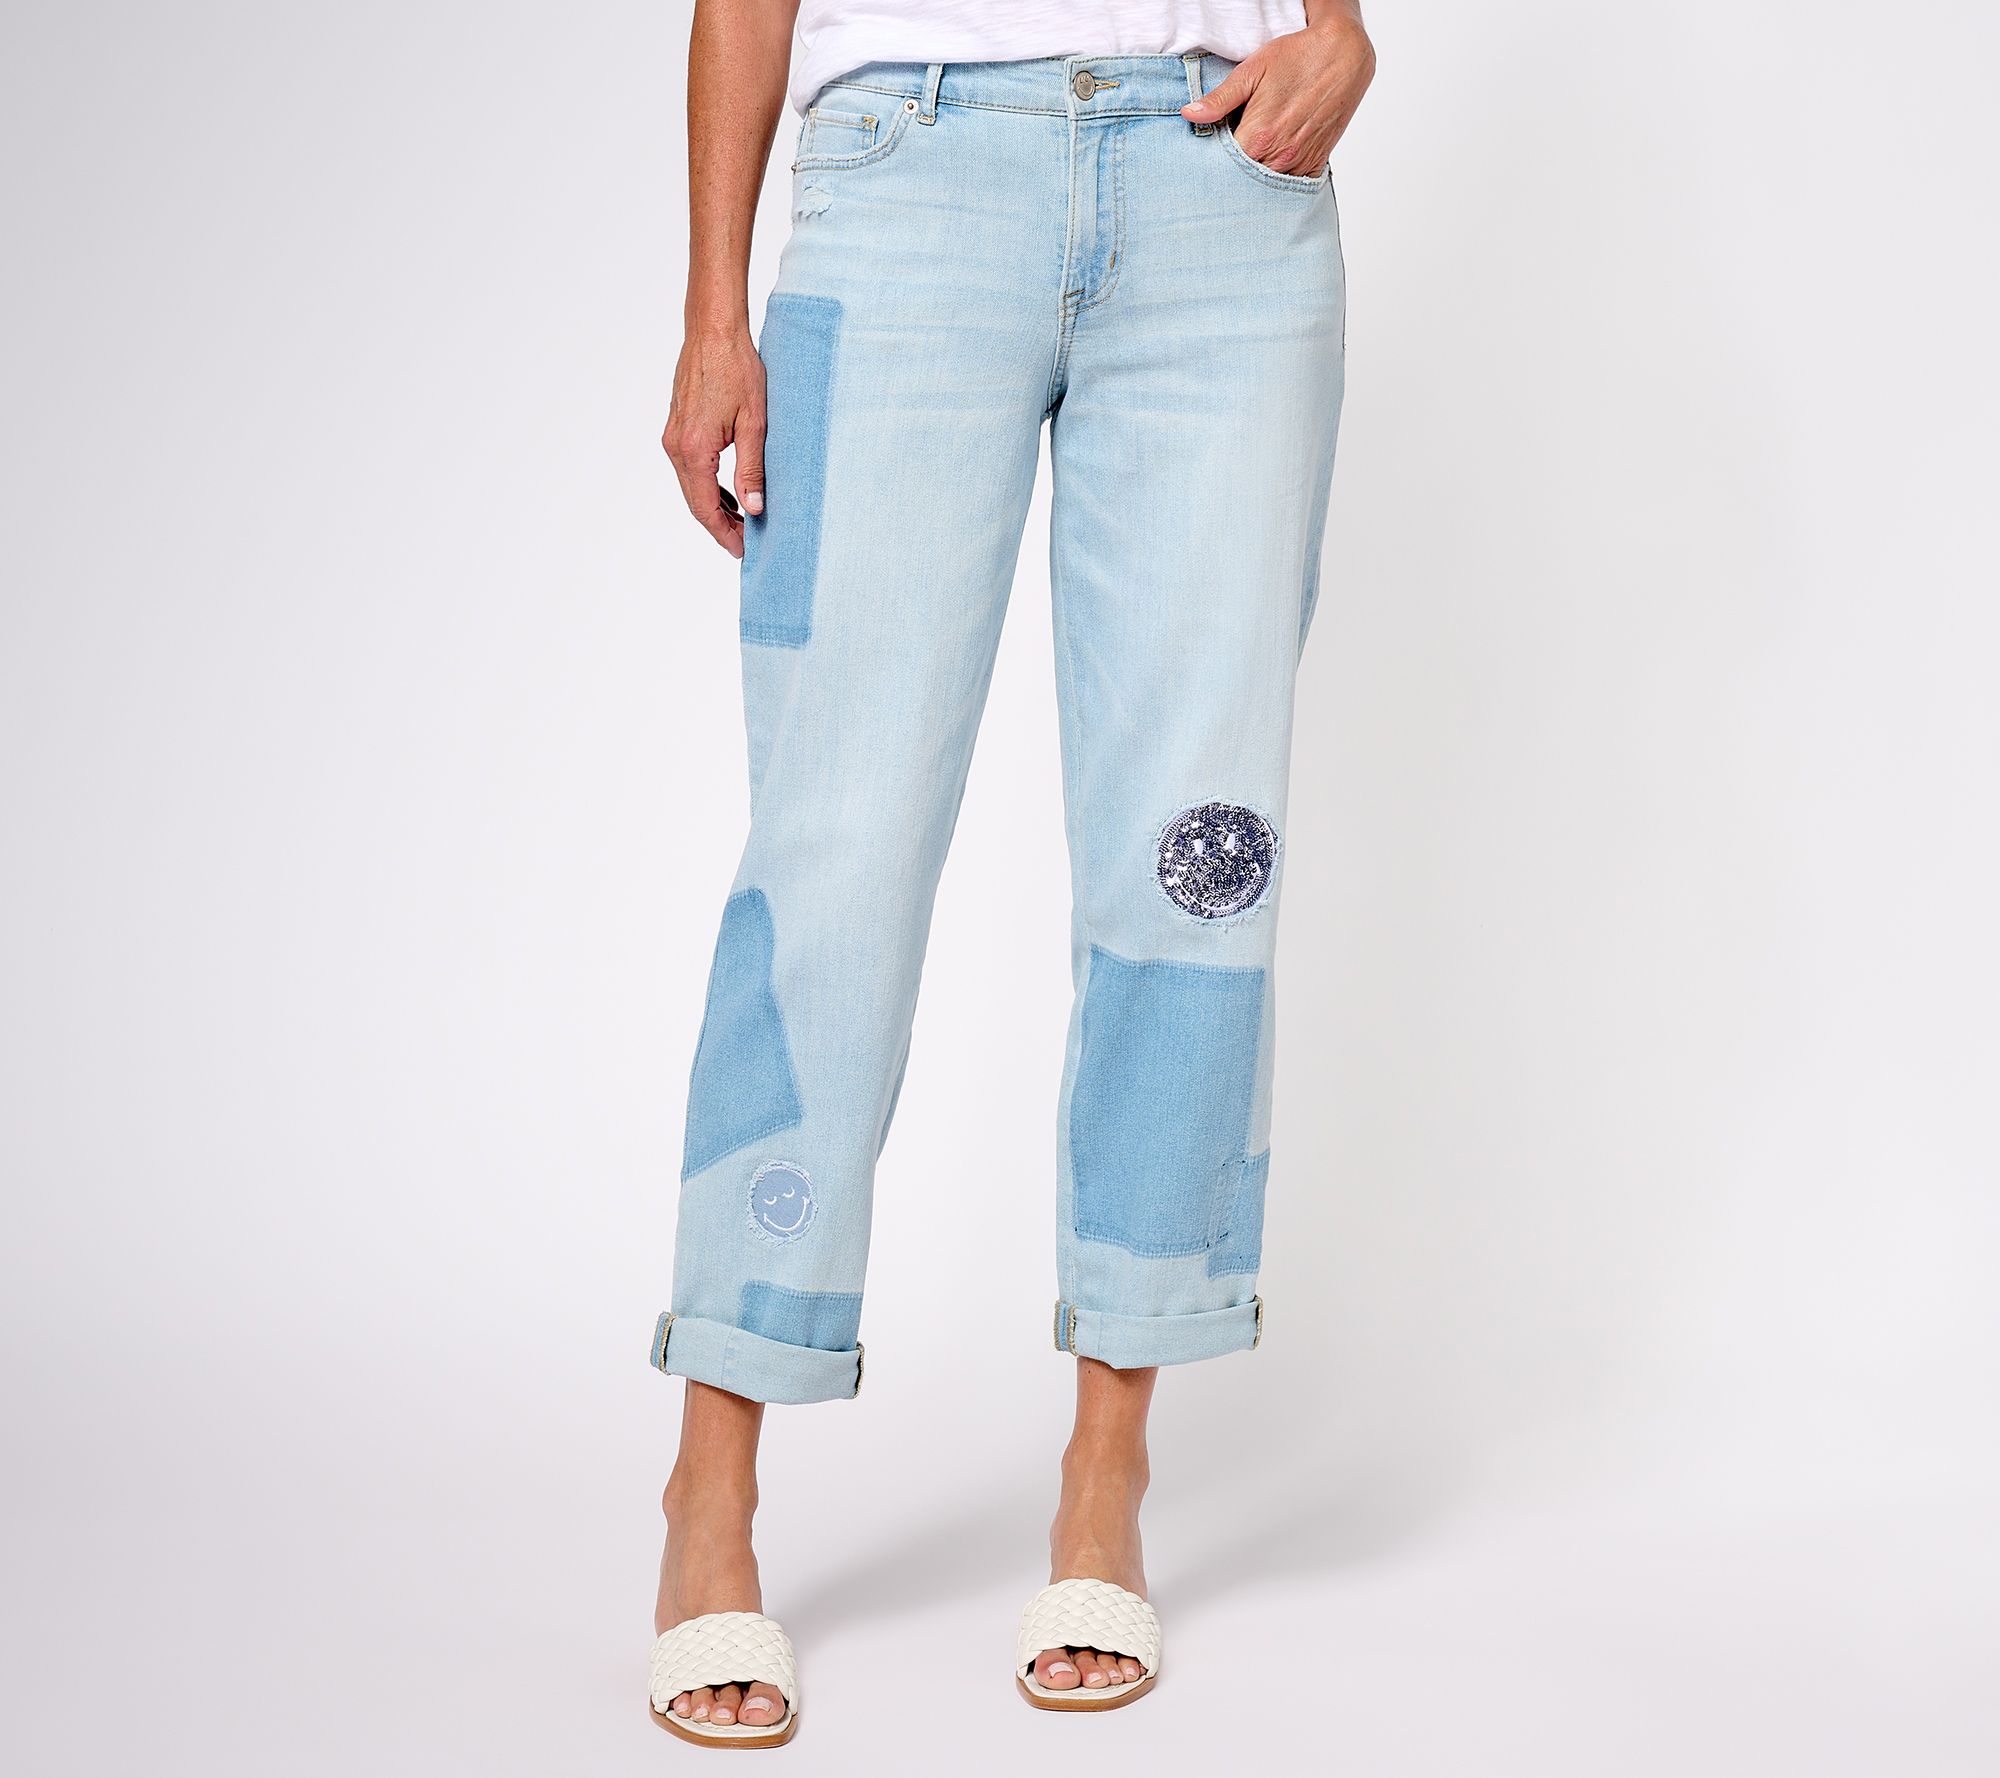 LOGO by Lori Goldstein x Smiley World Special Edition Regular Jeans ...